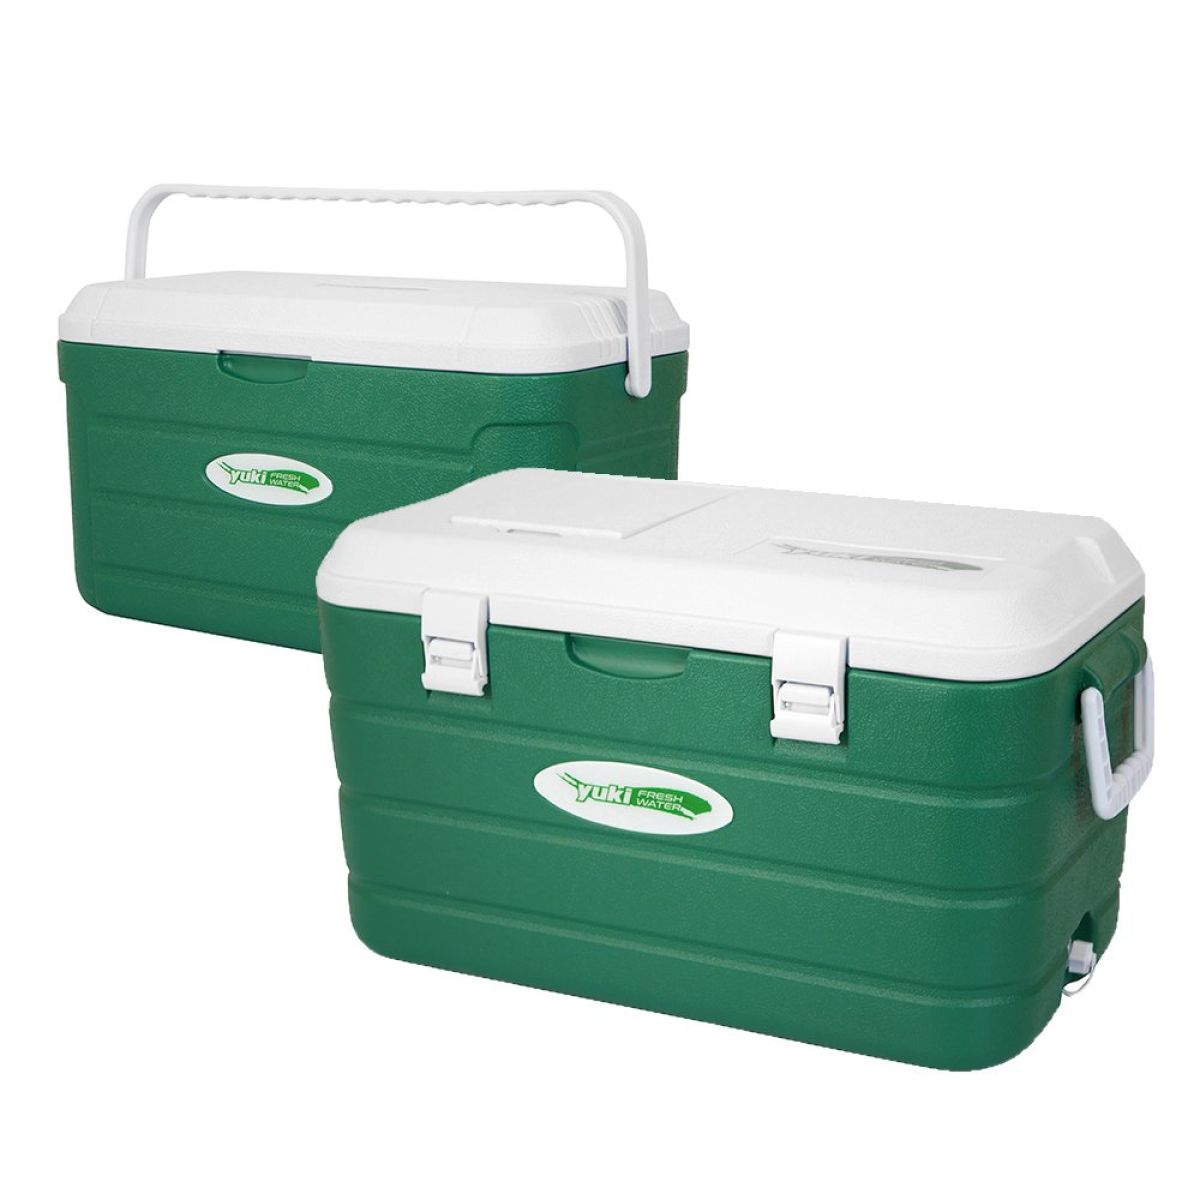 Glacière Isotherme Green Cooler Yuki